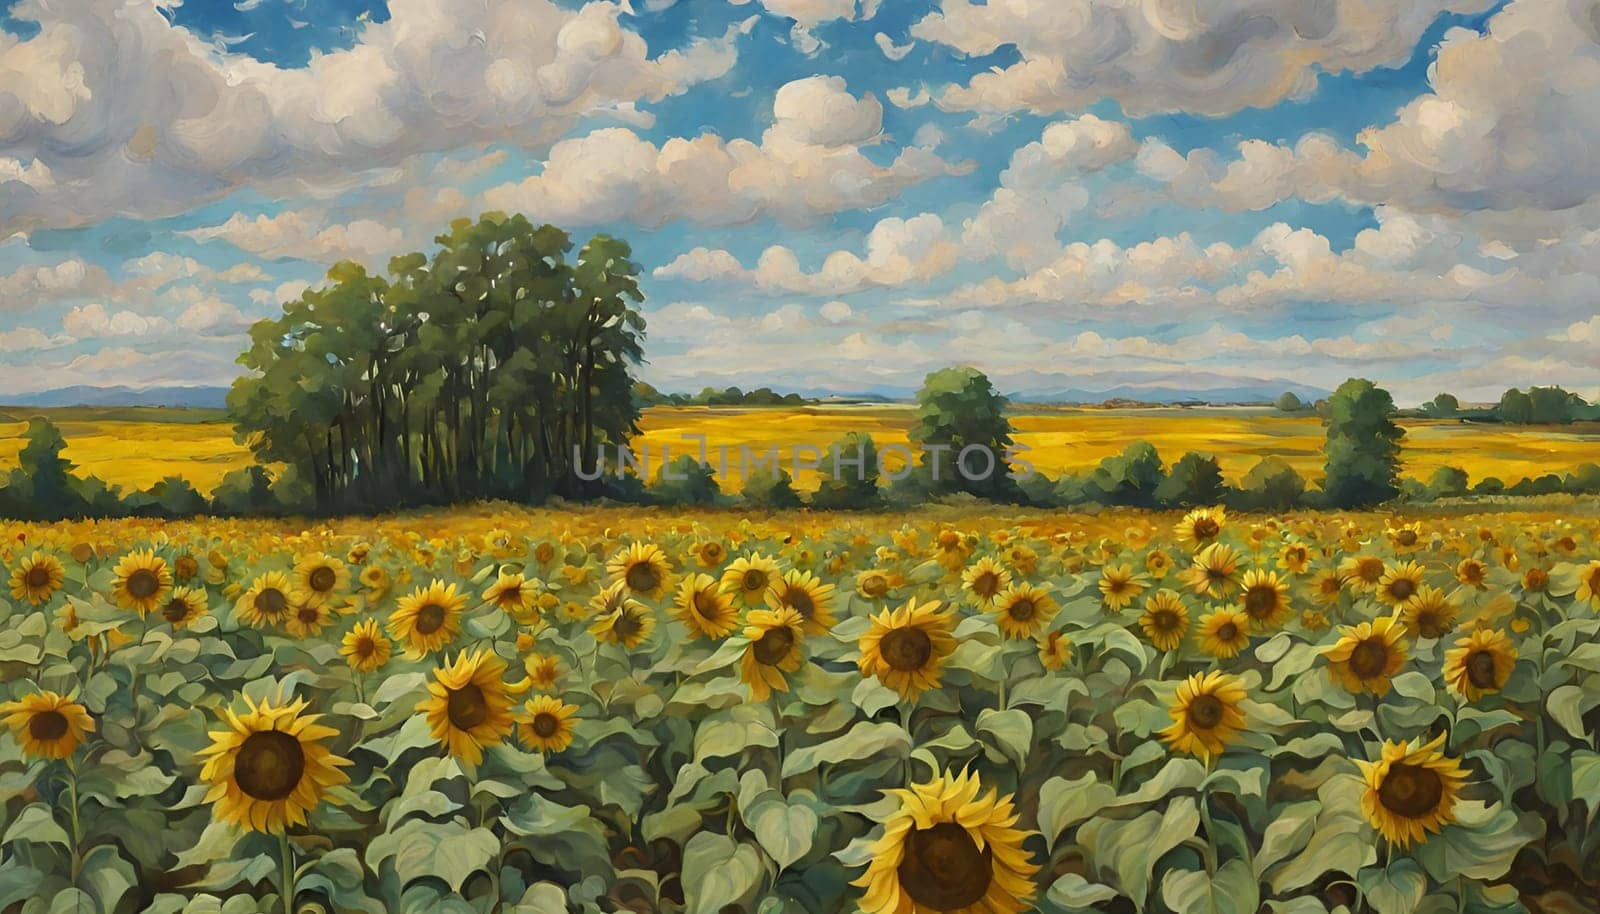 valentine's Day A field of sunflowers under a blue sky with white clouds. The sunflowers are yellow and bright. Happy Valentine's Day by Designlab